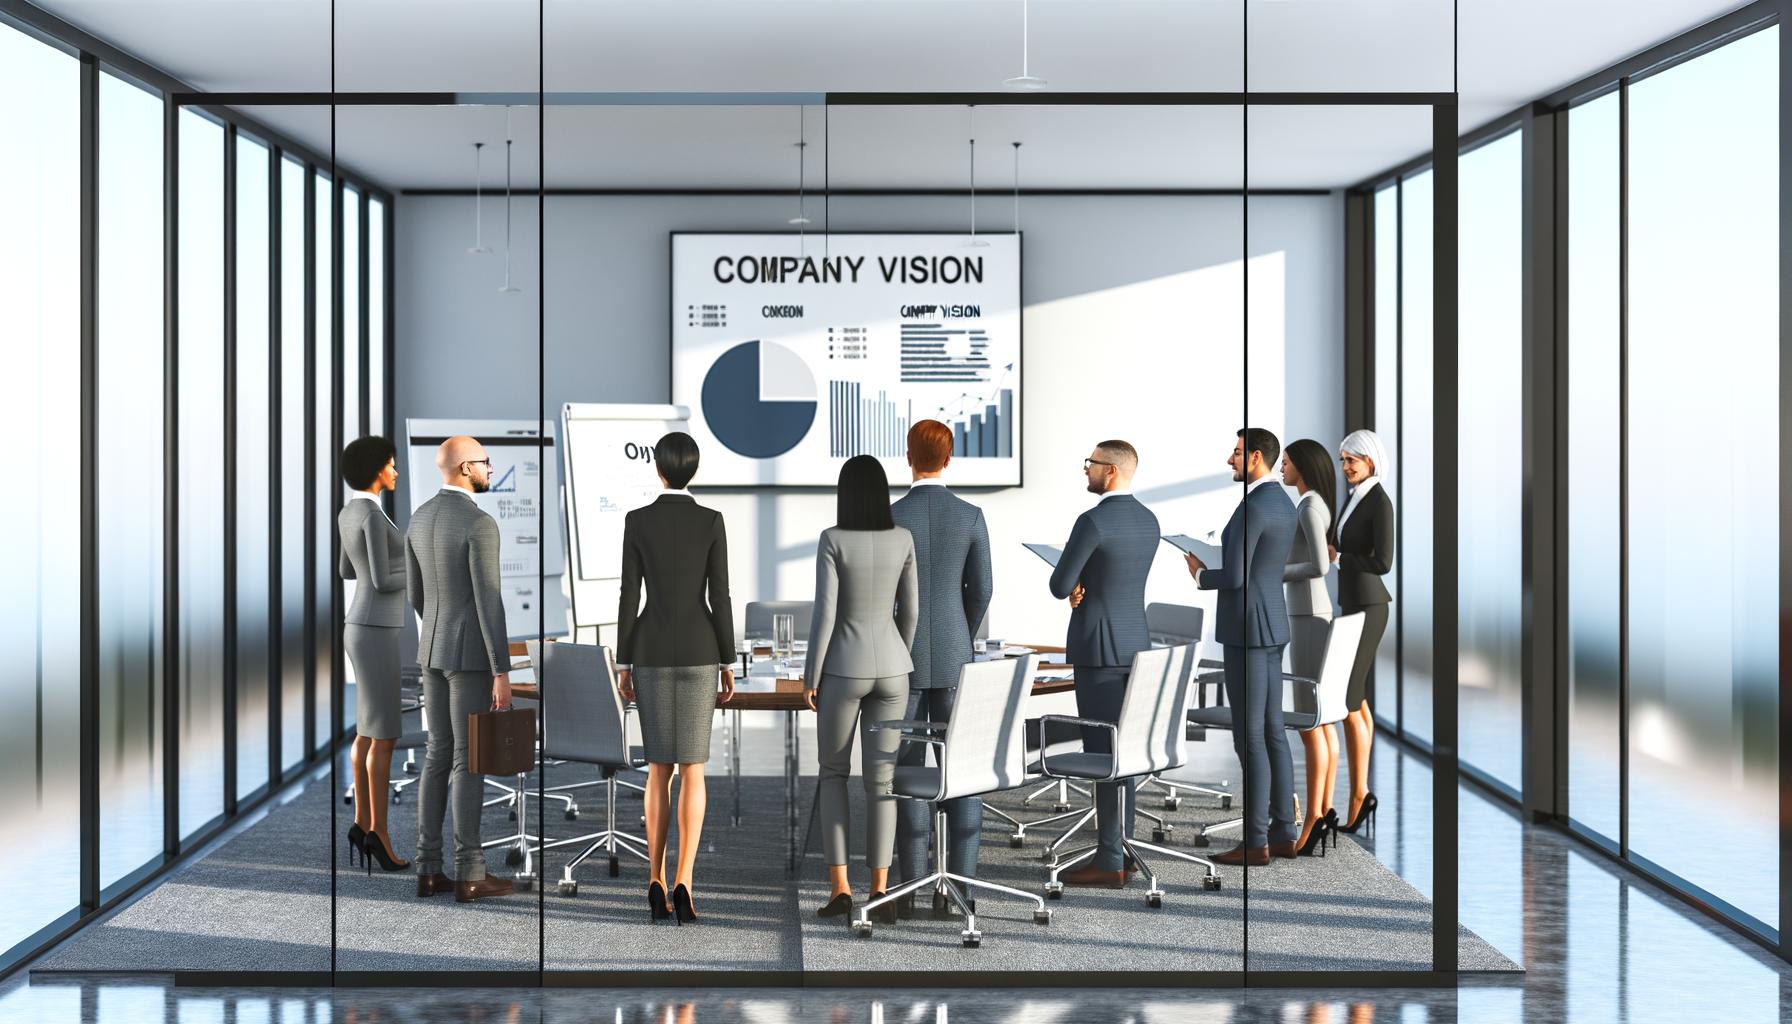 executives aligning their vision for the company in a modern office space